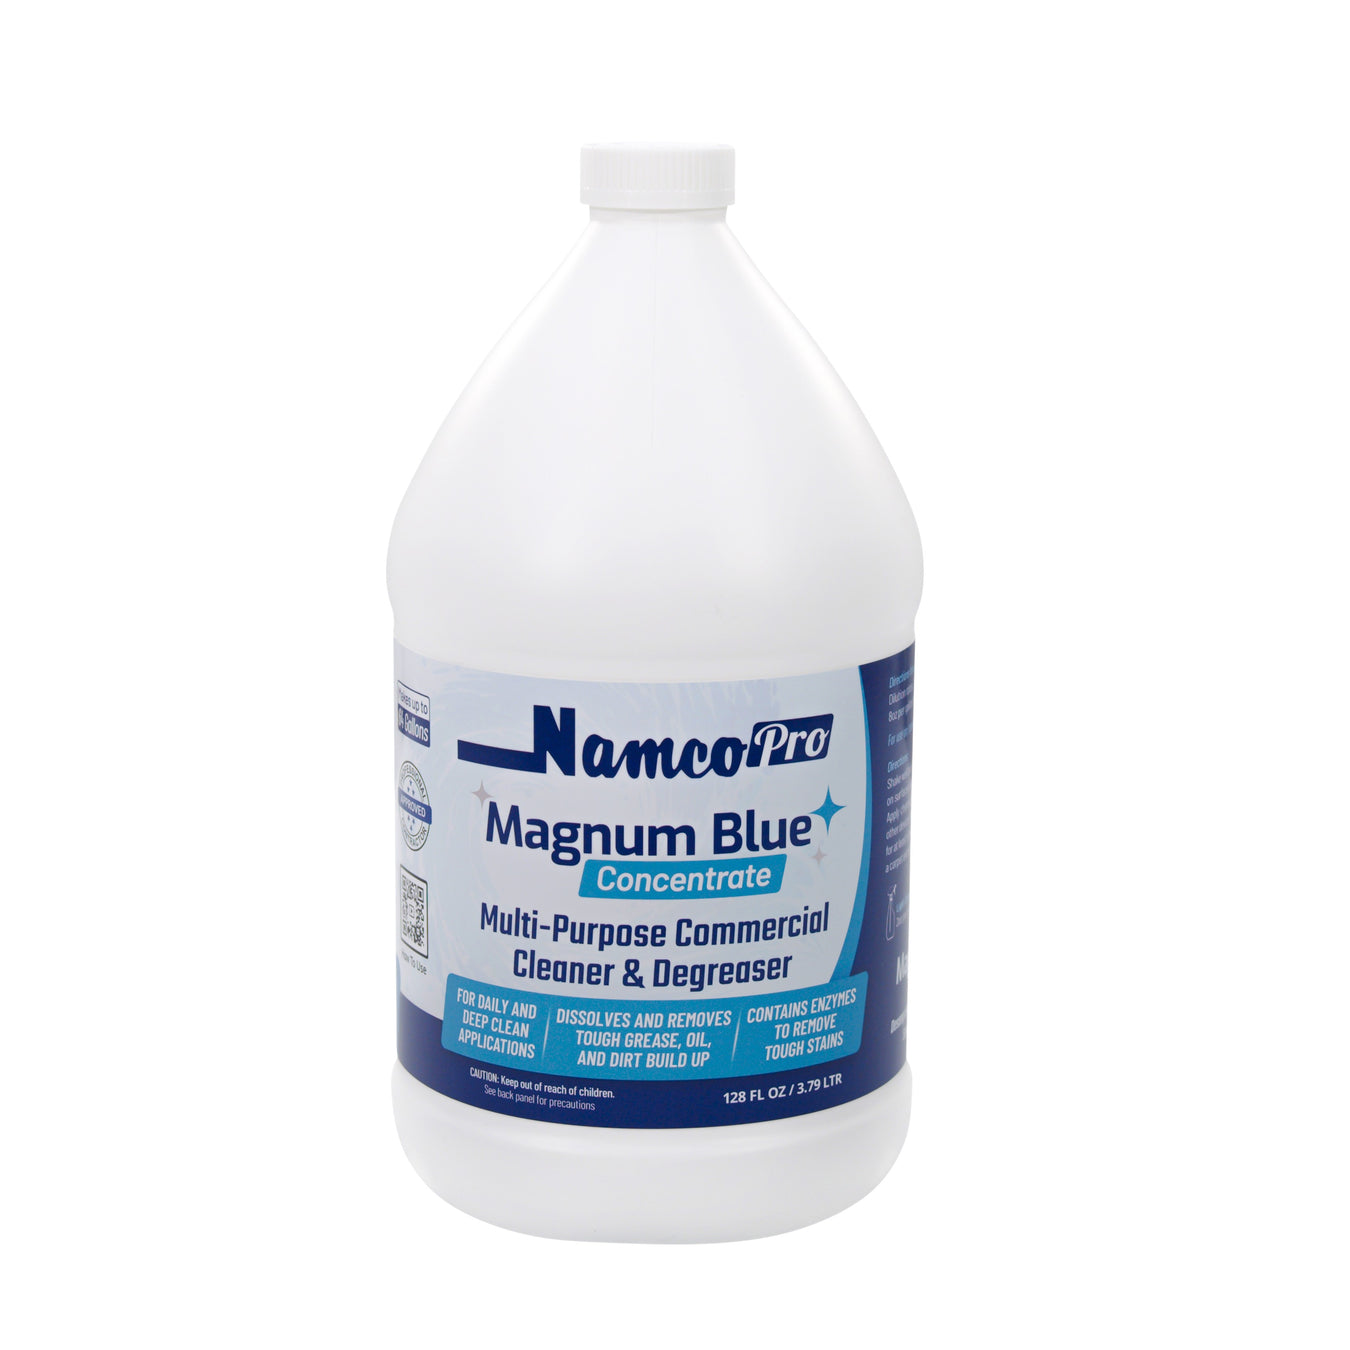 Premium Commercial Floor Cleaning Products